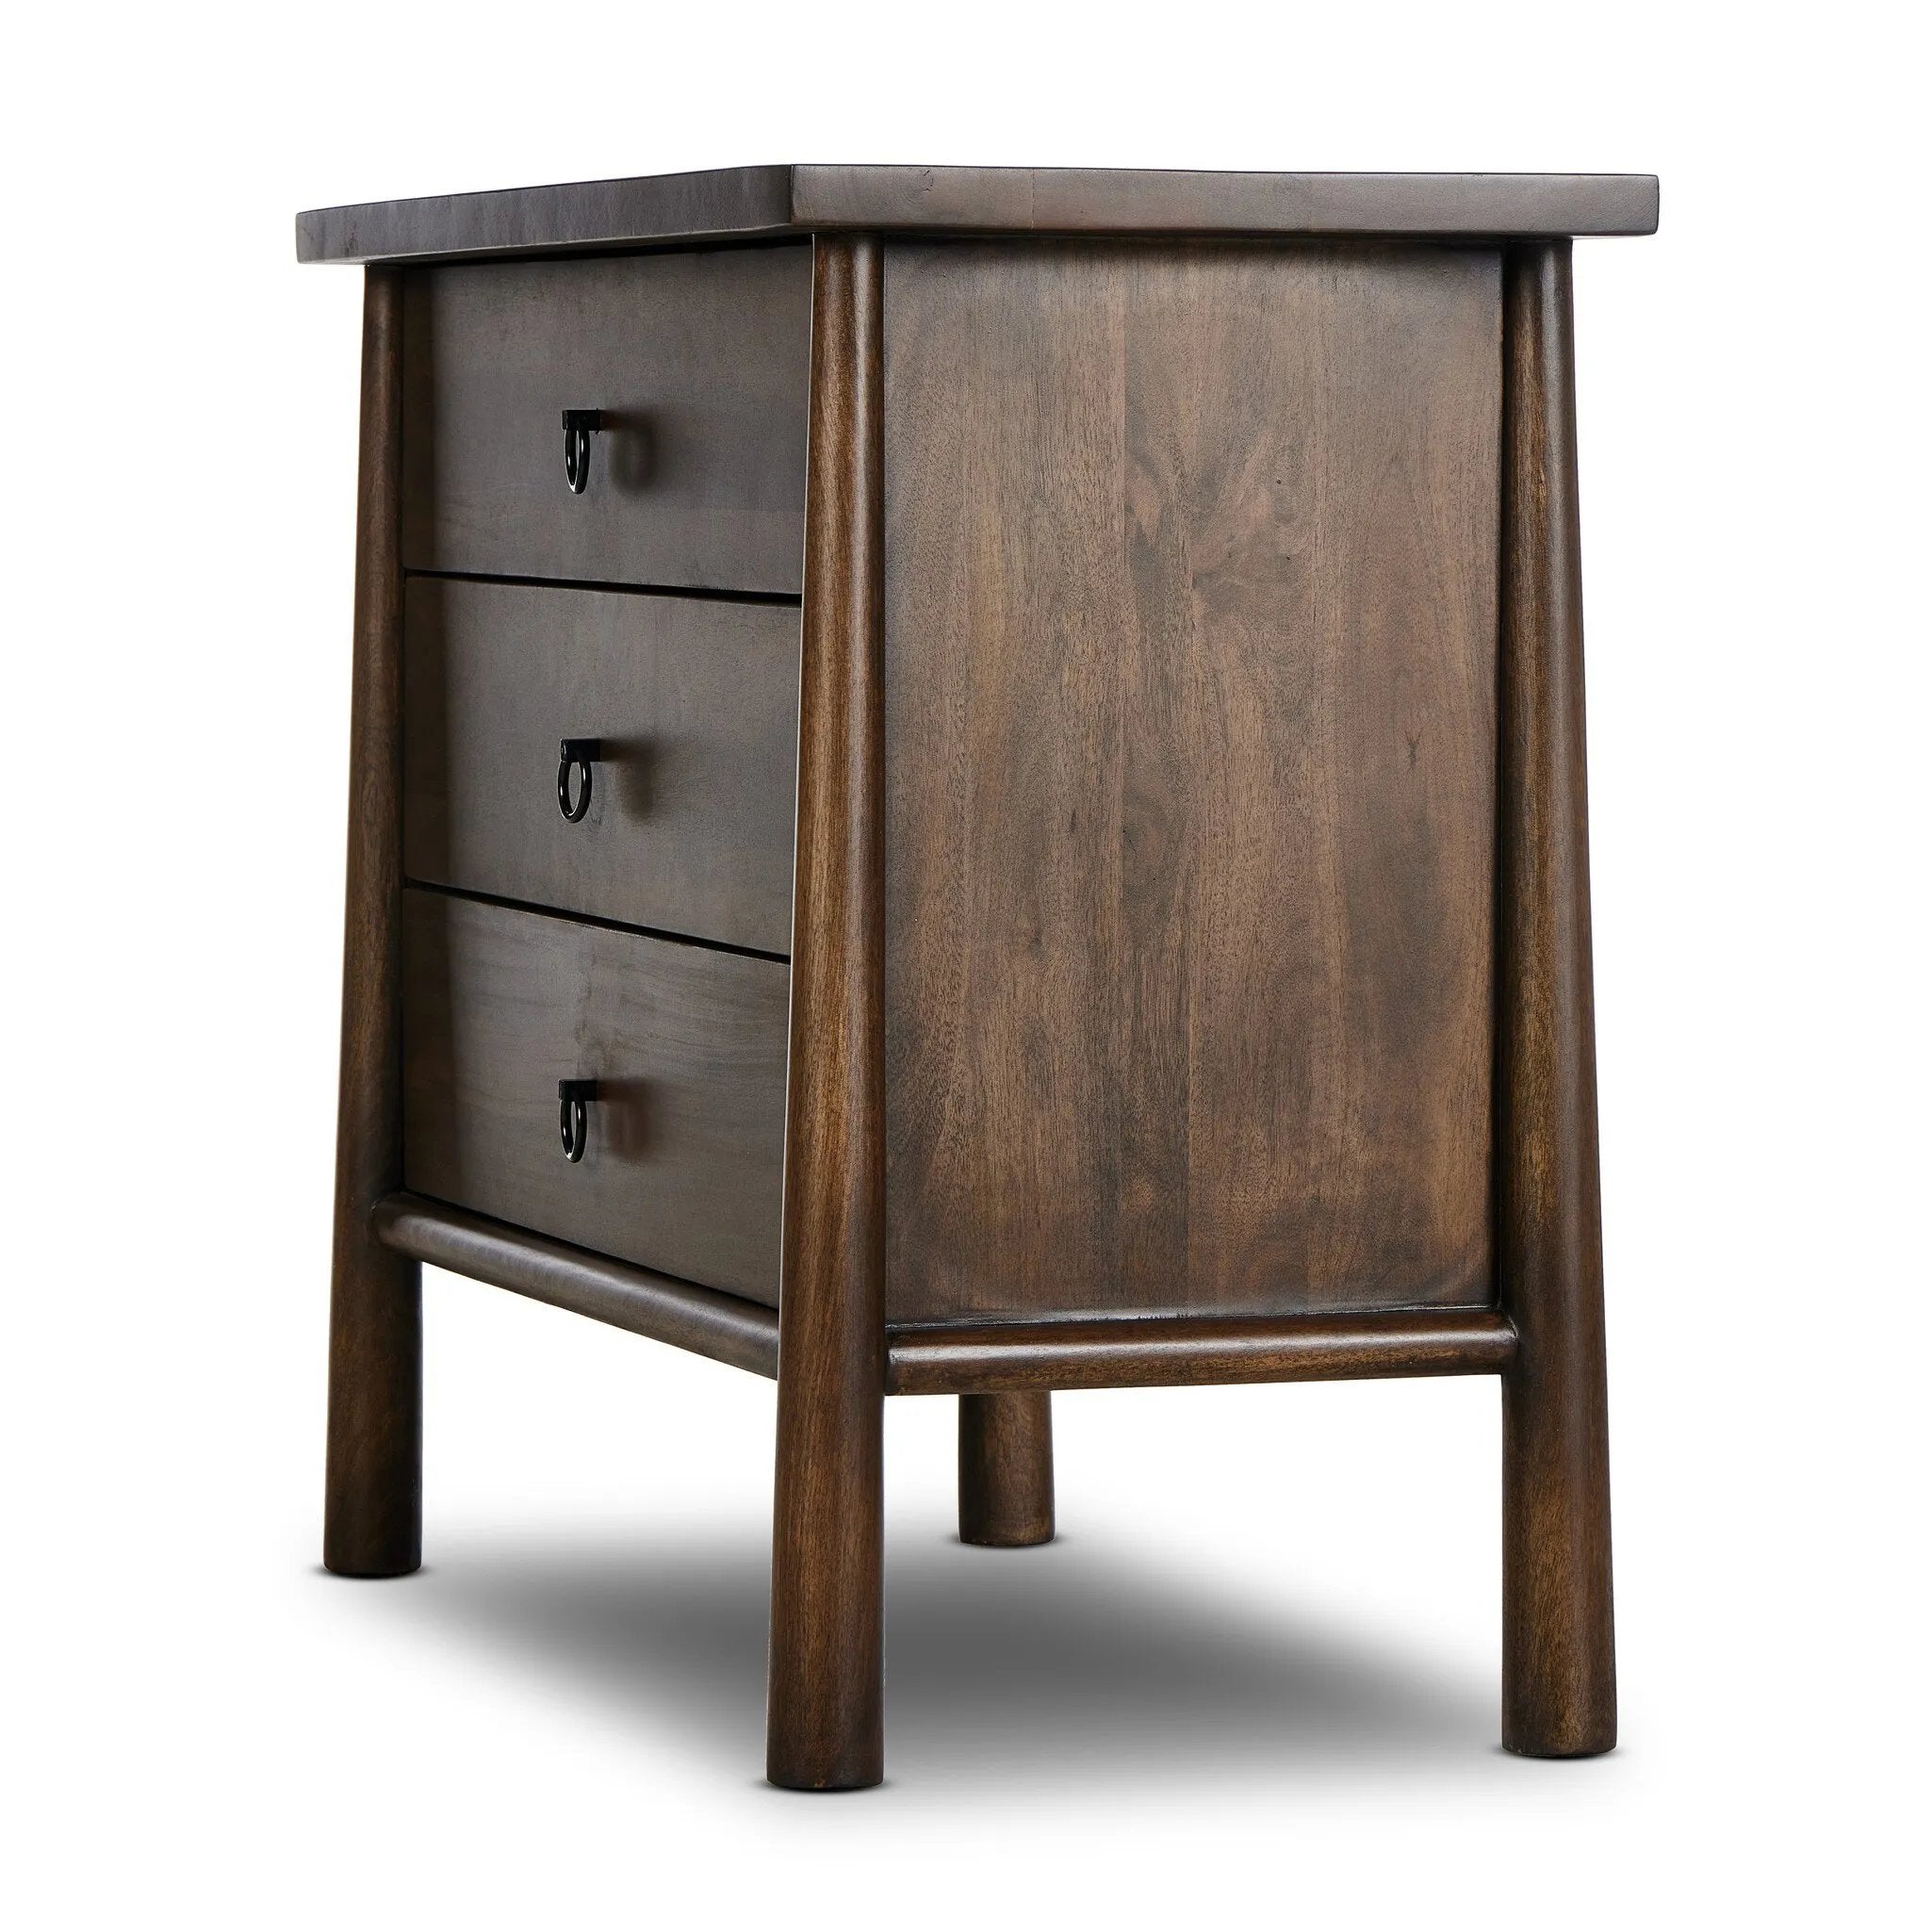 Inspired by French antique design, this dresser stands on round tapered legs with a prominent overhang top. Made of mango wood with cast iron key ring pulls, three drawers make it a versatile choice as a dresser or nightstand.Collection: May Amethyst Home provides interior design, new home construction design consulting, vintage area rugs, and lighting in the Nashville metro area.